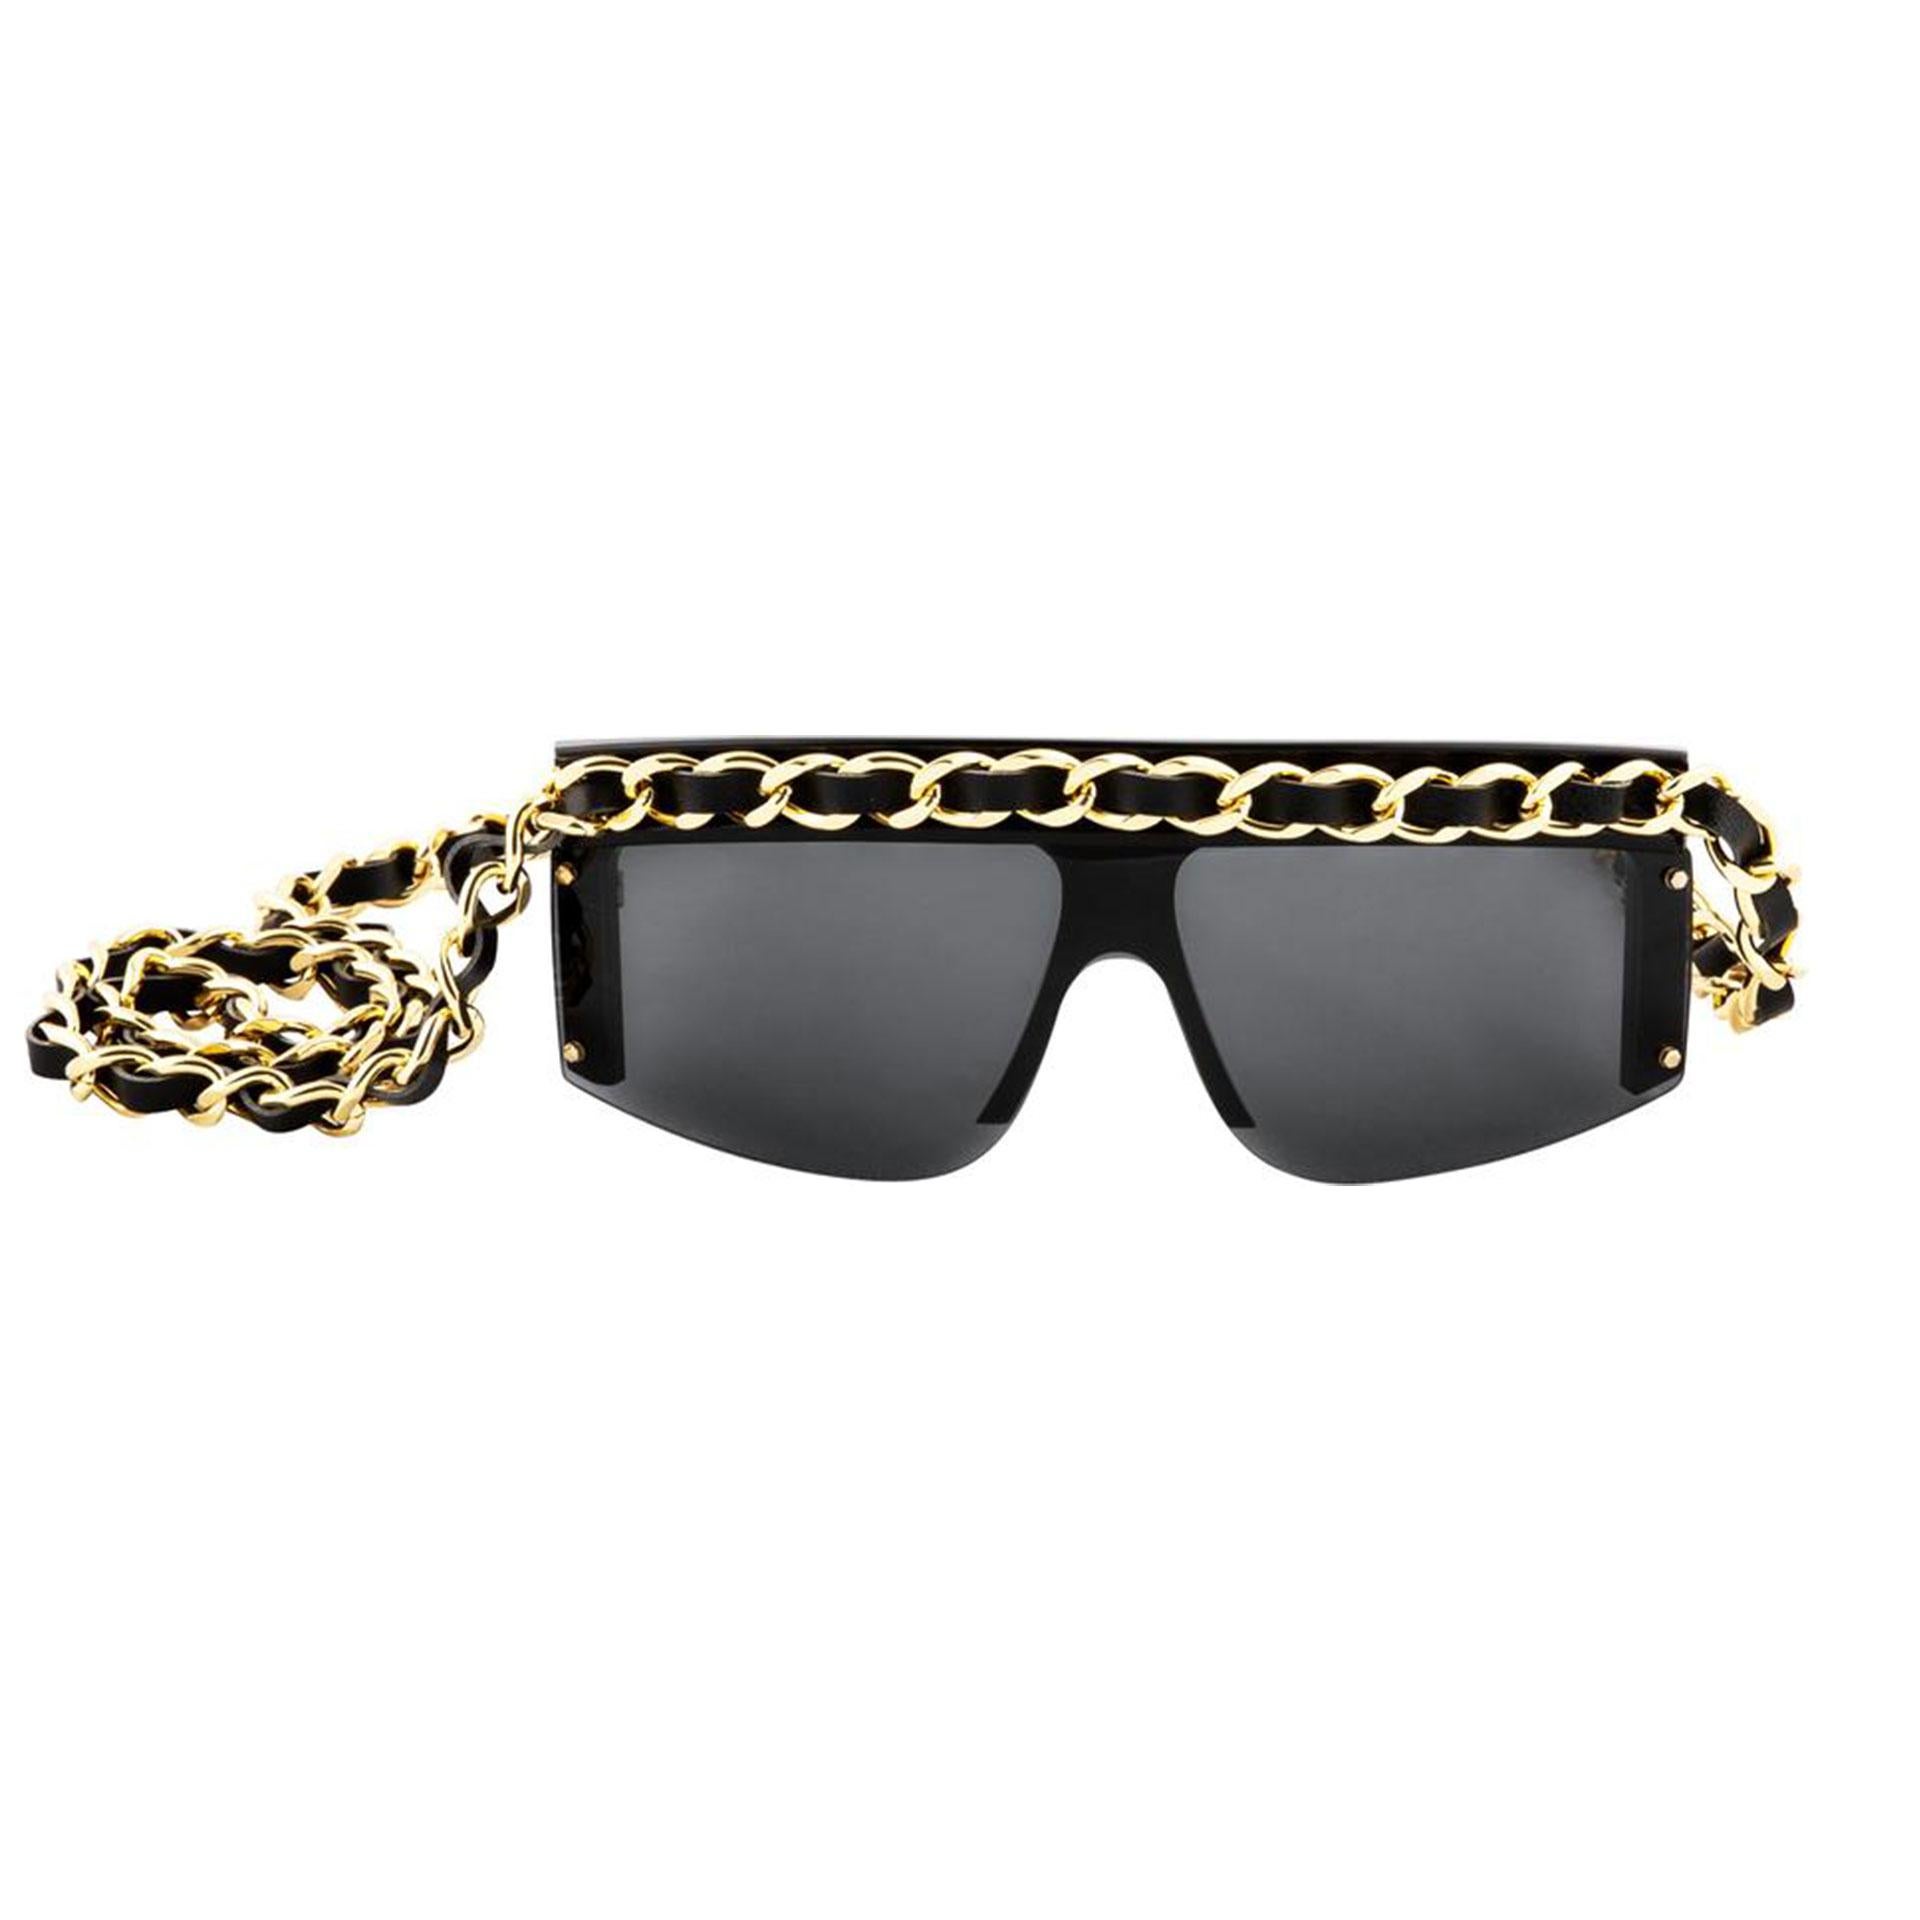 These are the most sought after Vintage  Chanel Sunglasses and are considered as the 